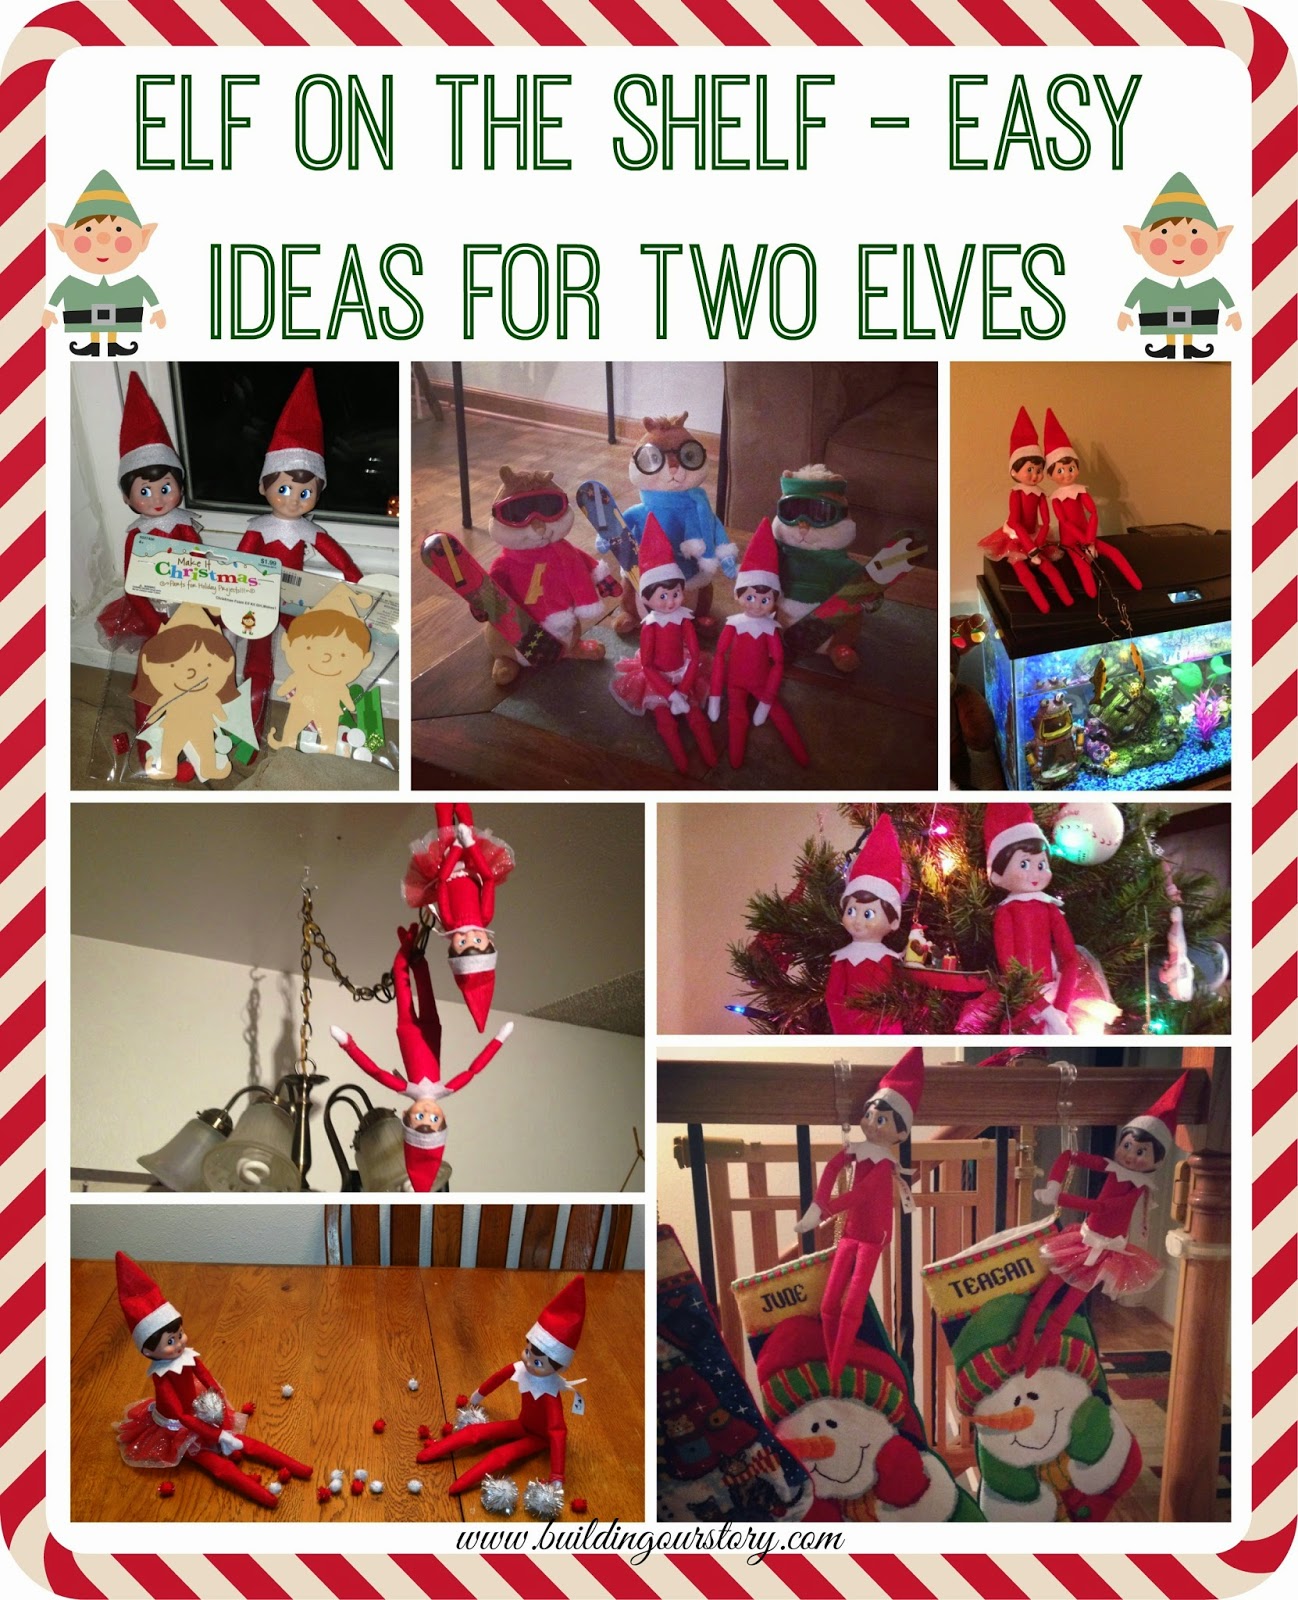 Welcome Elf on the Shelf - Building Our Story